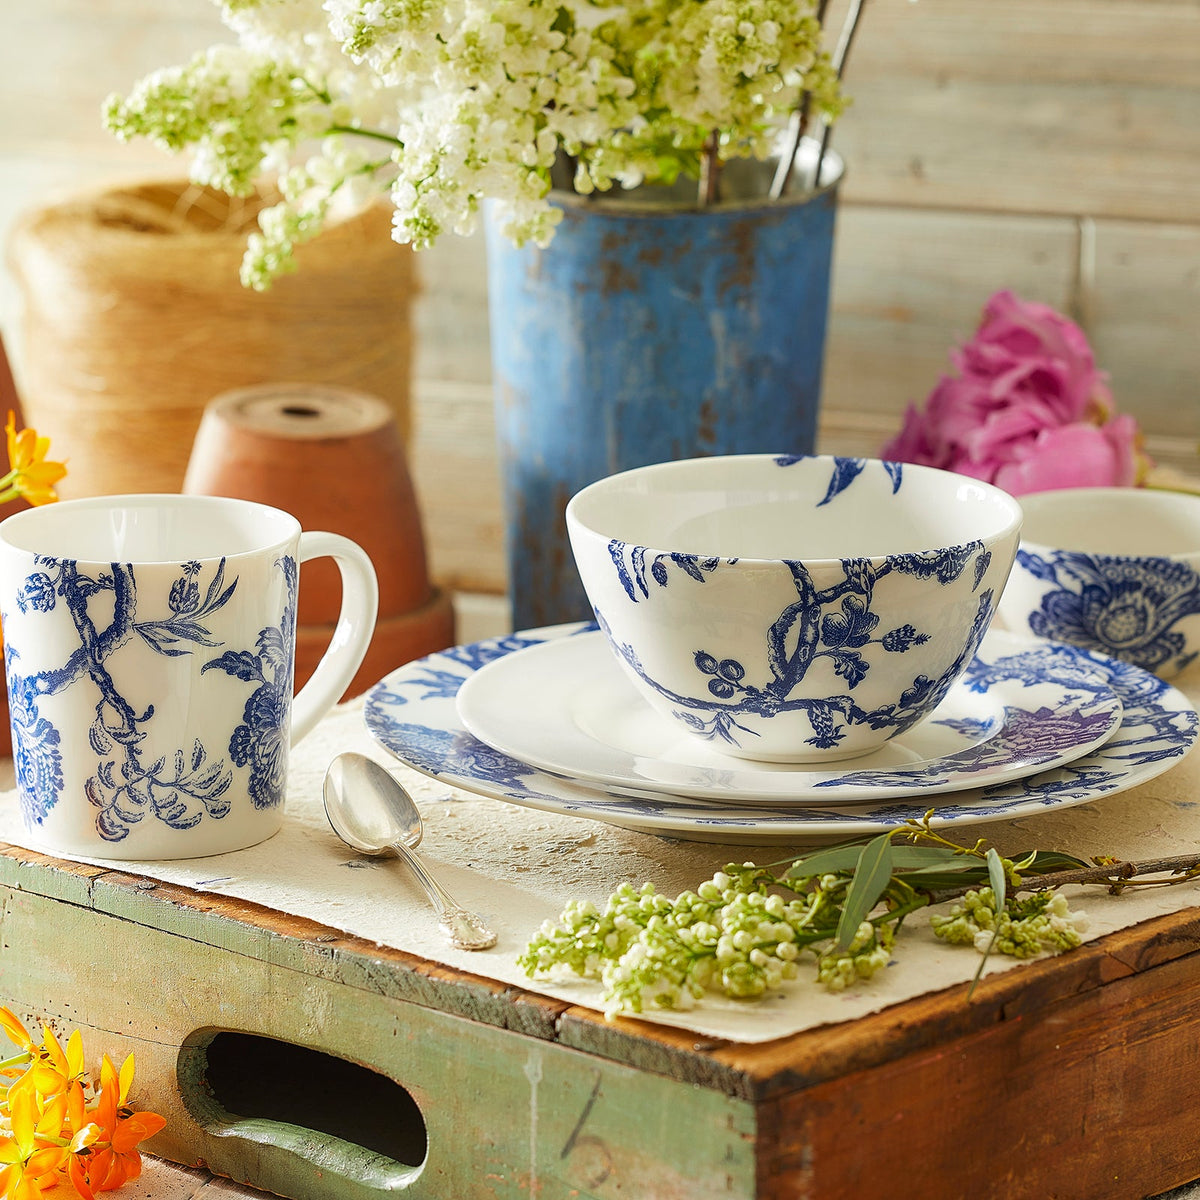 The Blue Arcadia Collection is shown here as a place setting in a garden scene.